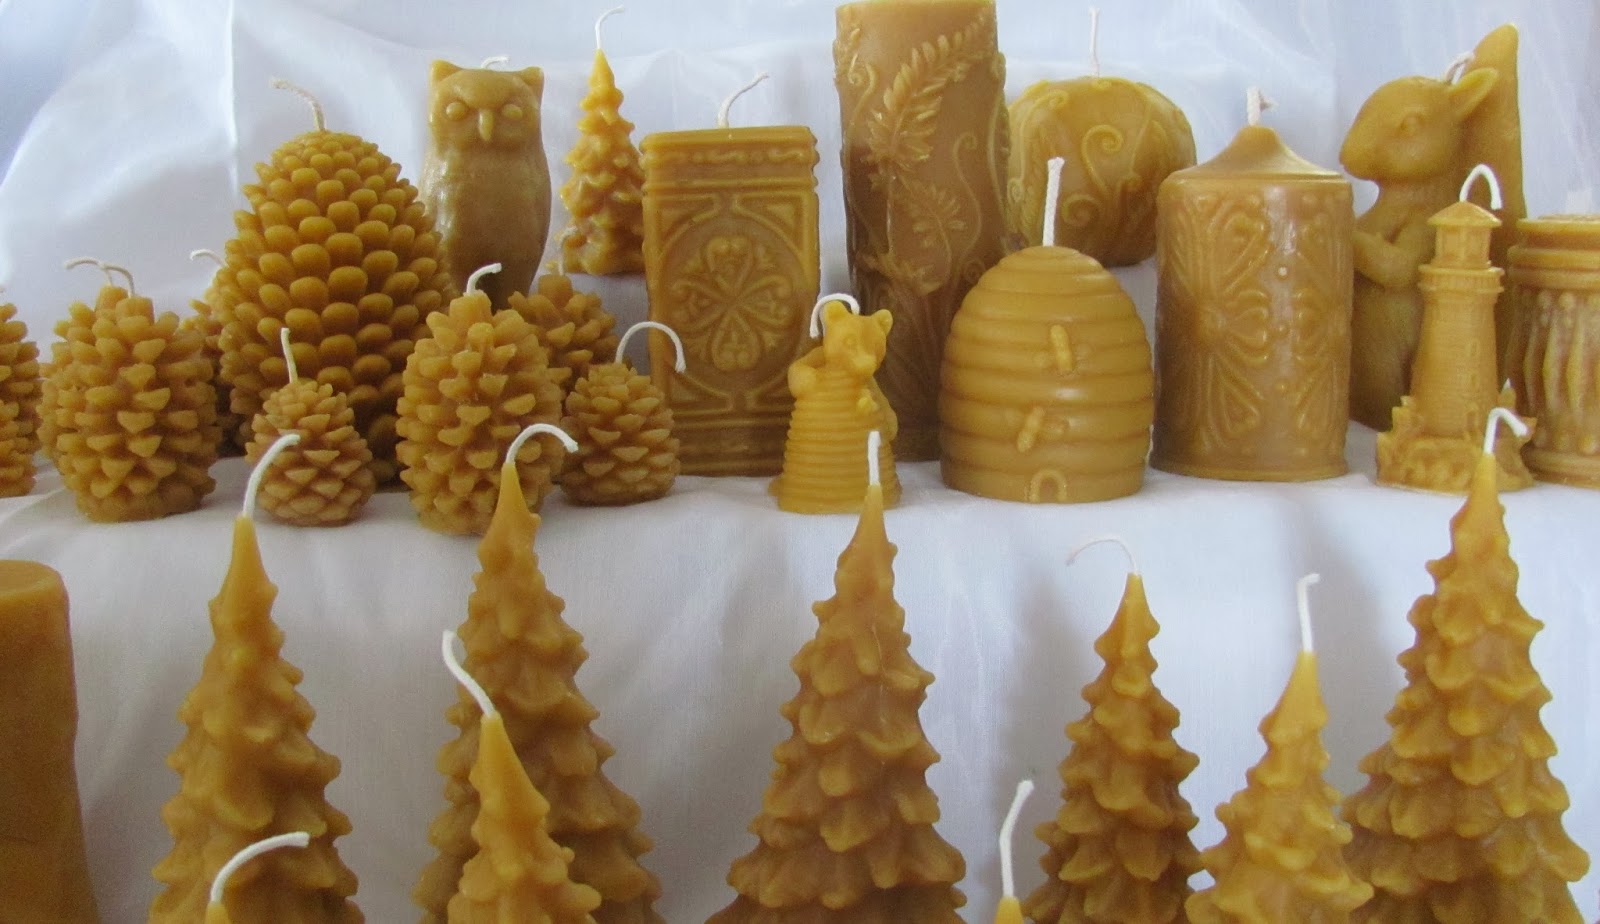 How are Beeswax Candles Better?